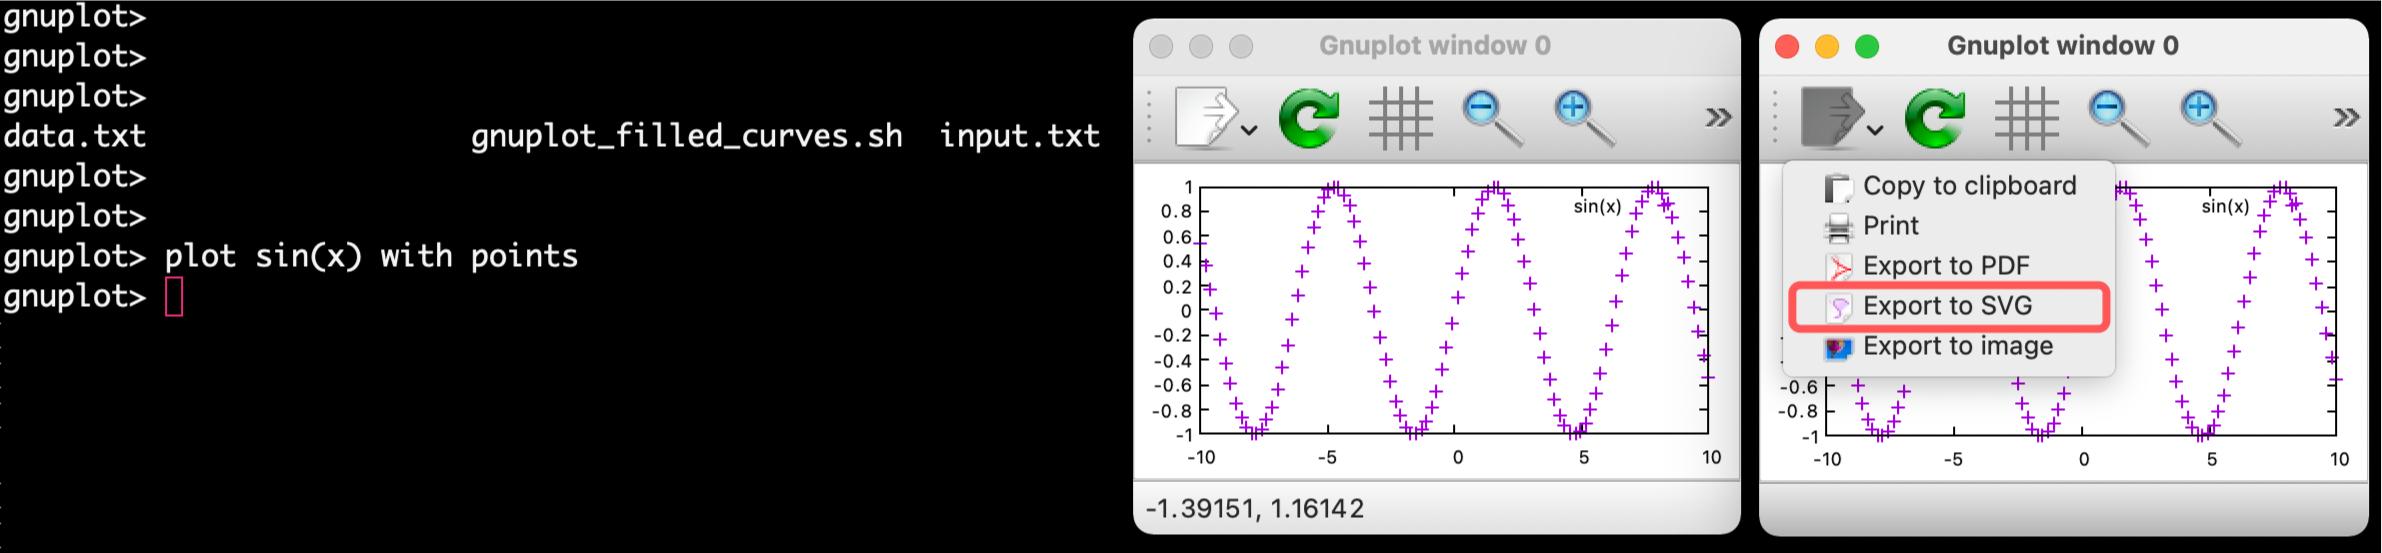 Open Gnuplot in the Terminal